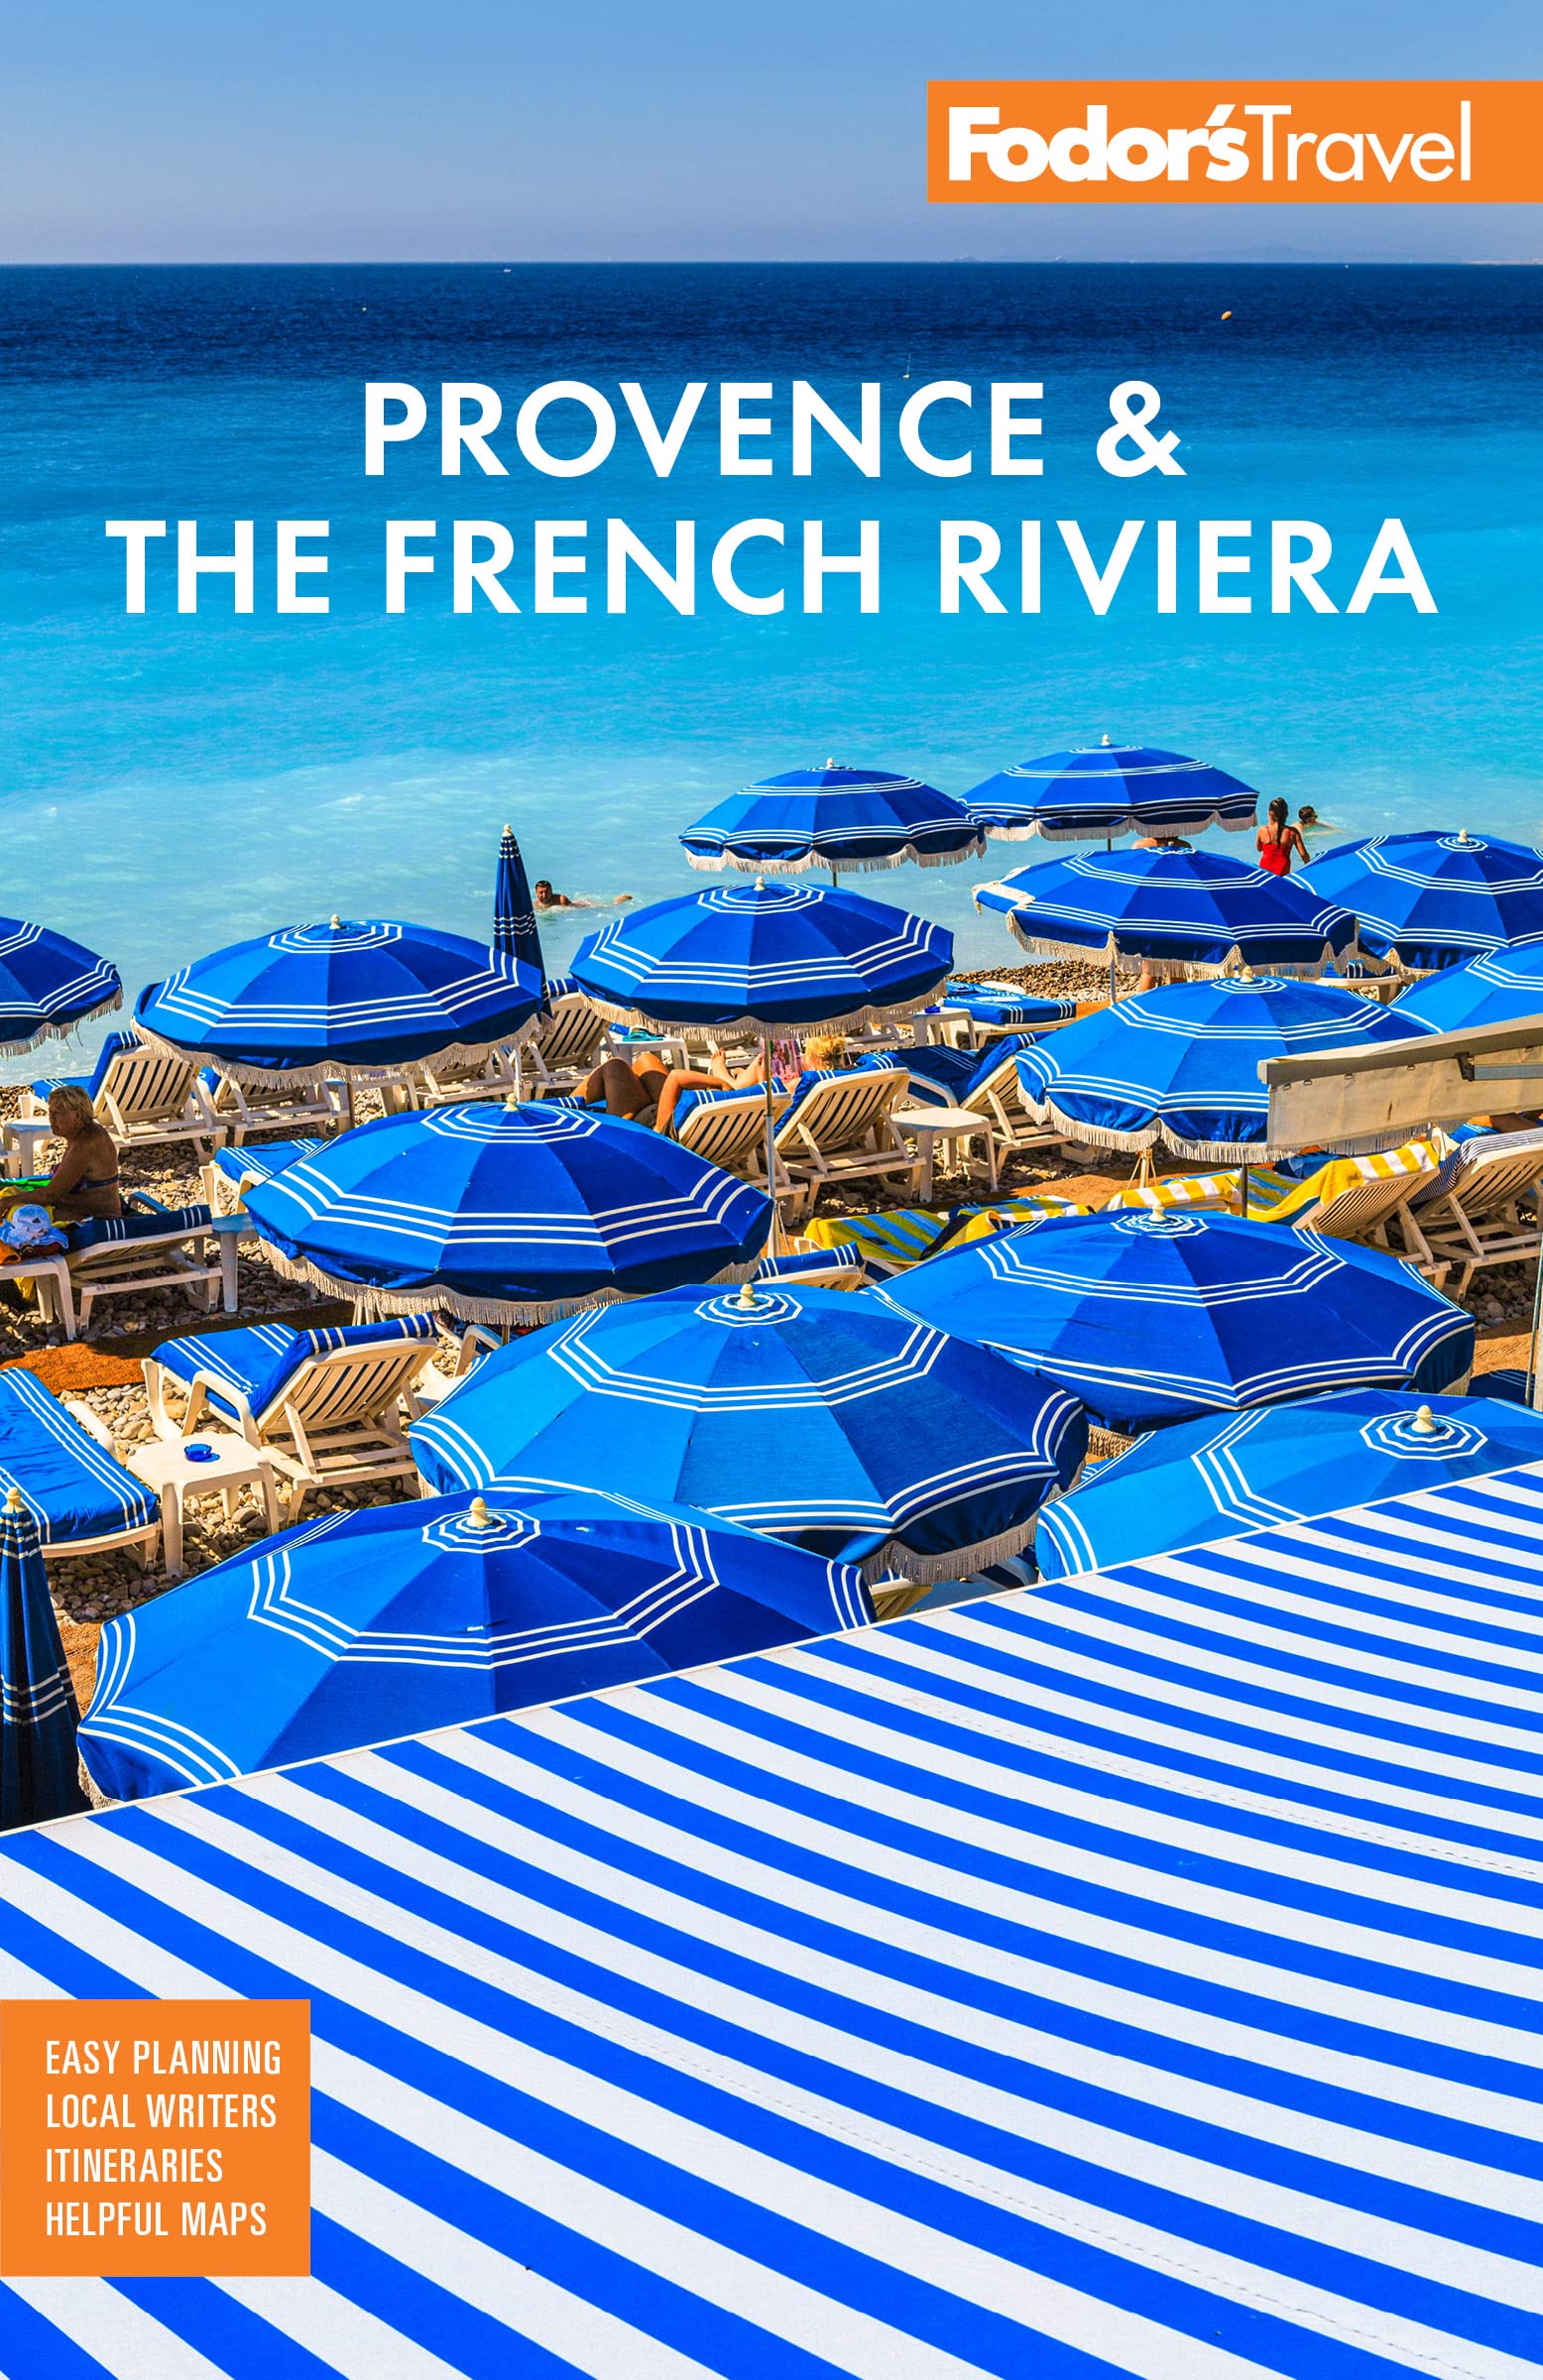 Fodor's Provence & the French Riviera (Full-color Travel Guide)